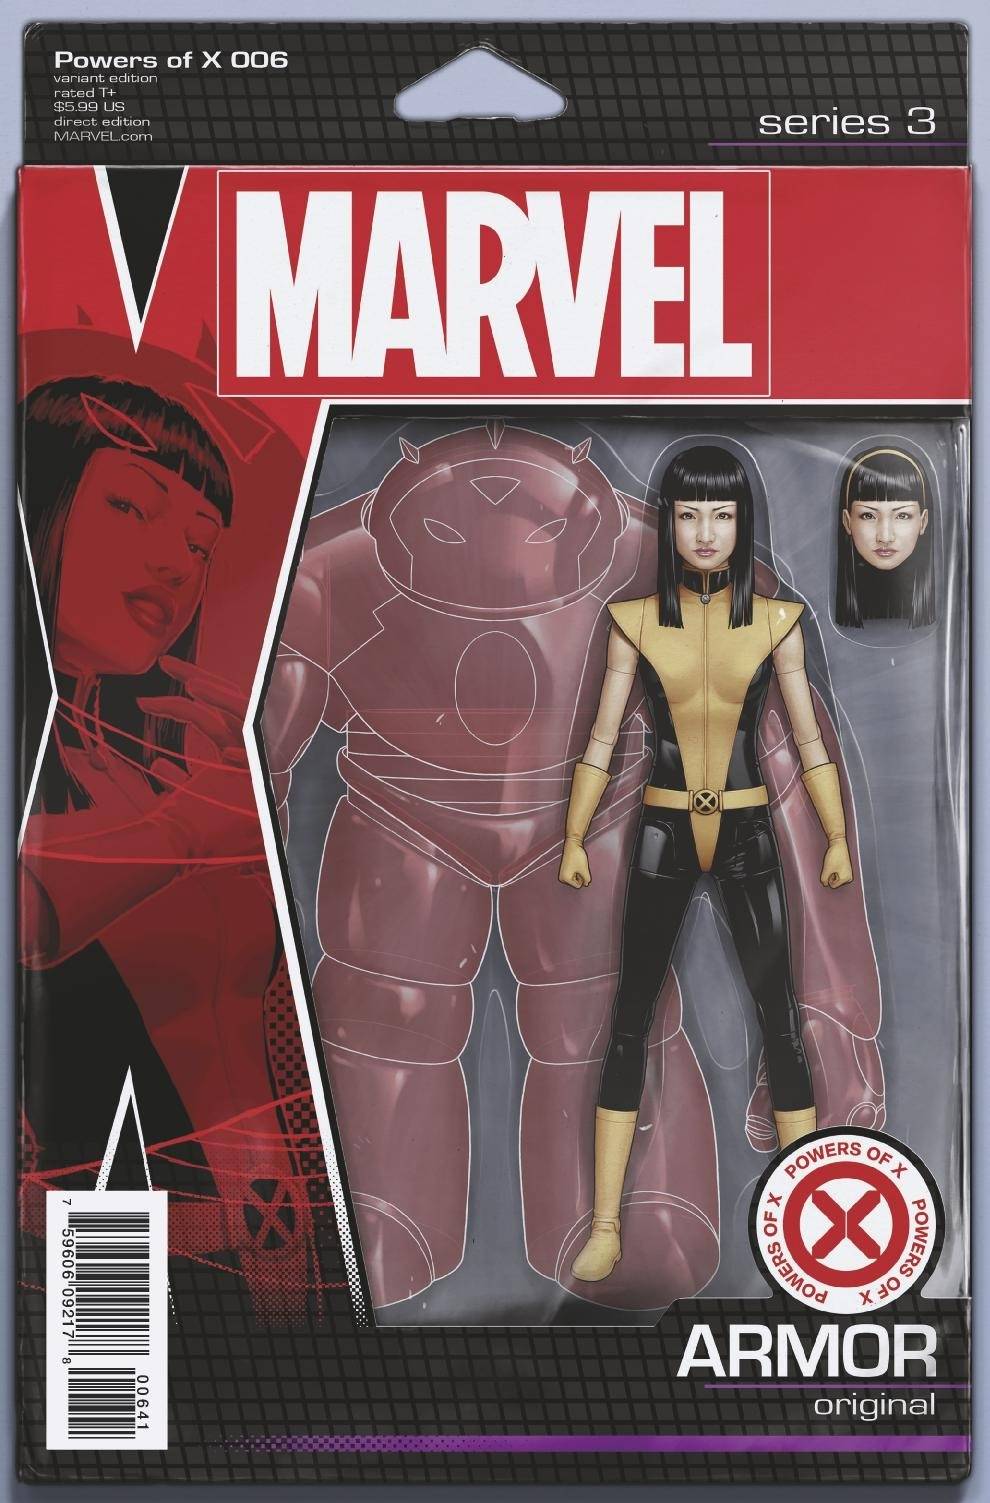 POWERS OF X #6 (OF 6) CHRISTOPHER ACTION FIGURE VAR